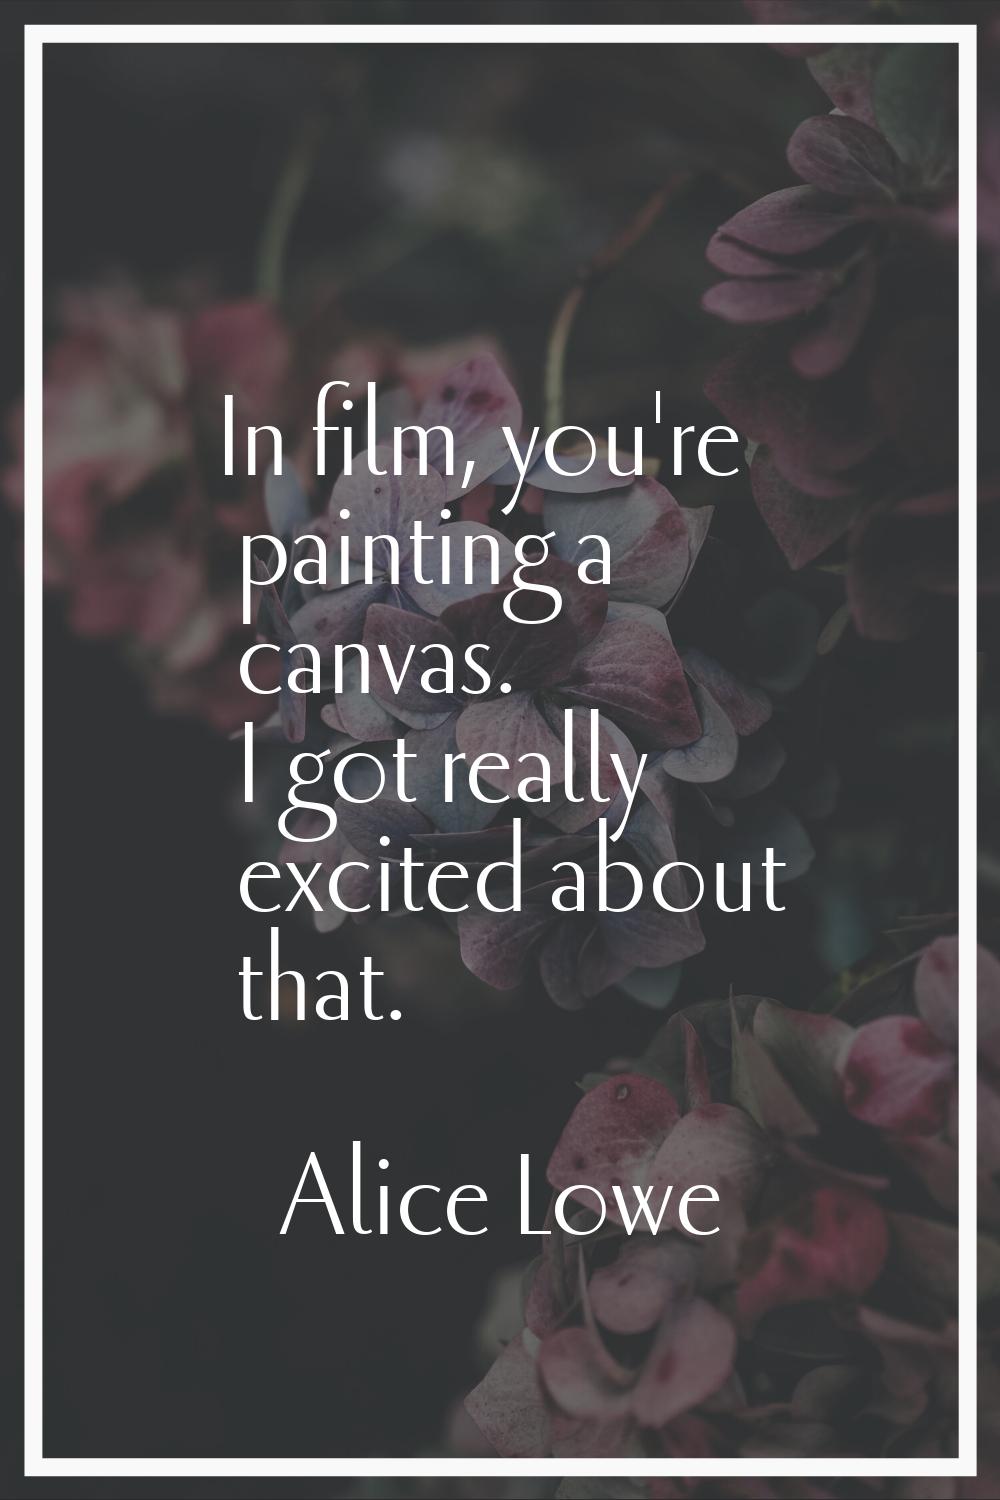 In film, you're painting a canvas. I got really excited about that.